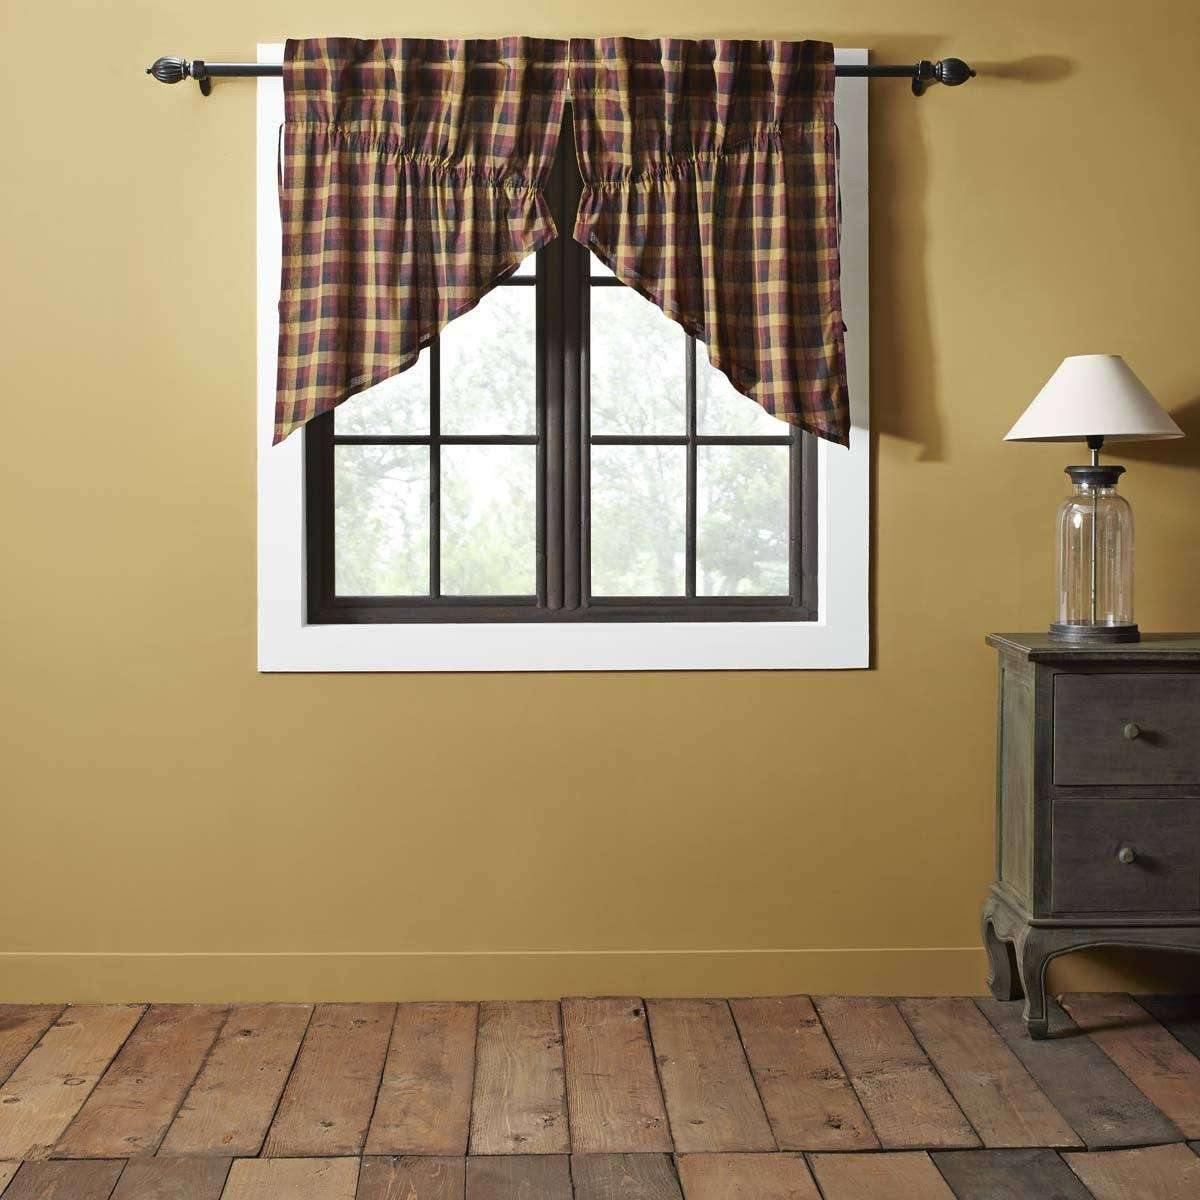 shop Heritage Farms Primitive Check Prairie Swag Curtain Set of 2 36x36x18 VHC Brands